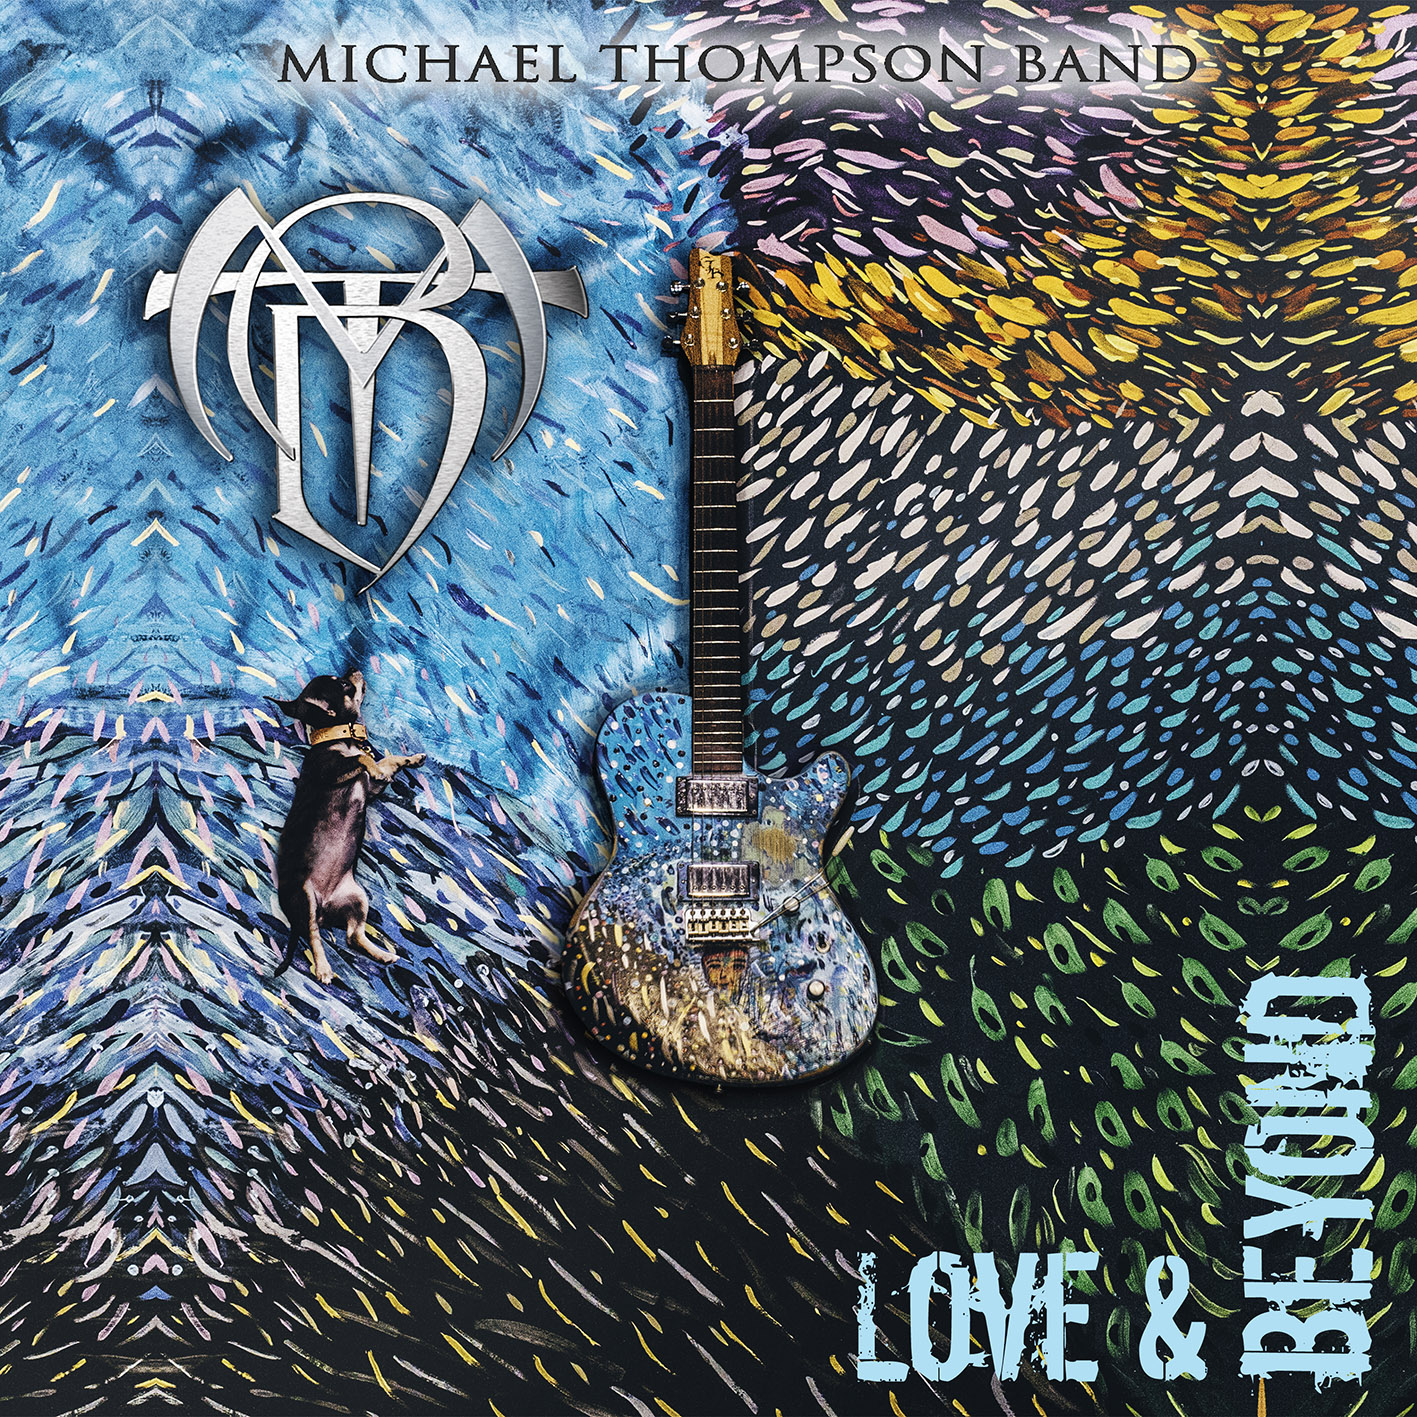 MICHAEL THOMPSON BAND - “Love And Beyond”